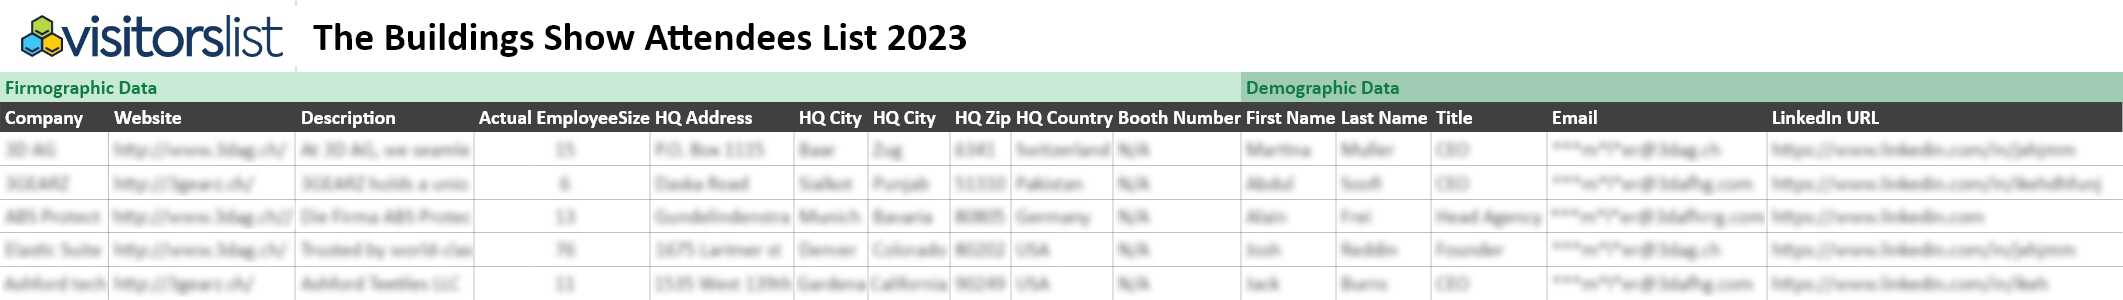 The Buildings Show Attendees List 2023